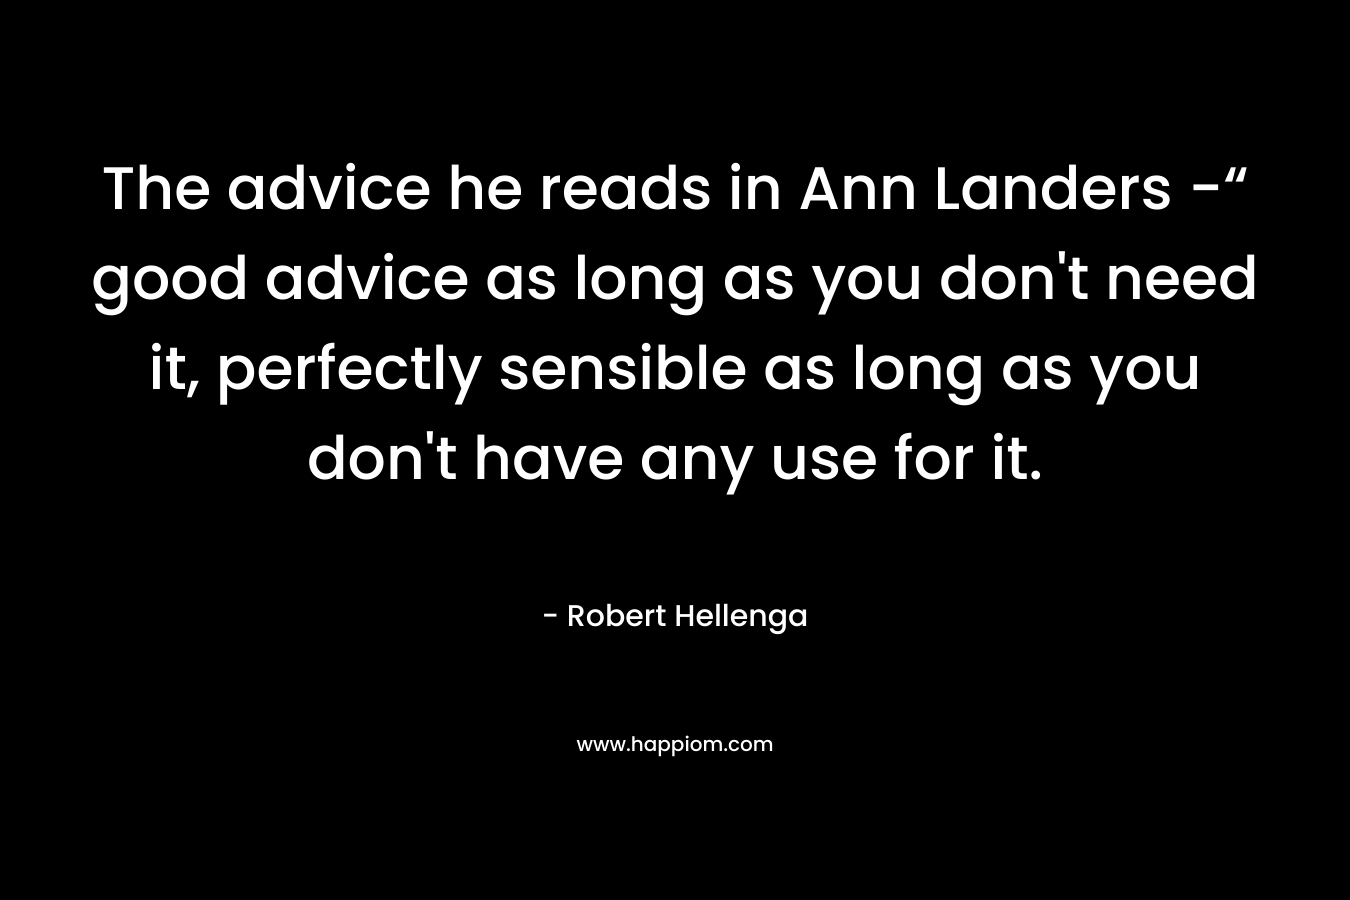 The advice he reads in Ann Landers -“ good advice as long as you don't need it, perfectly sensible as long as you don't have any use for it.